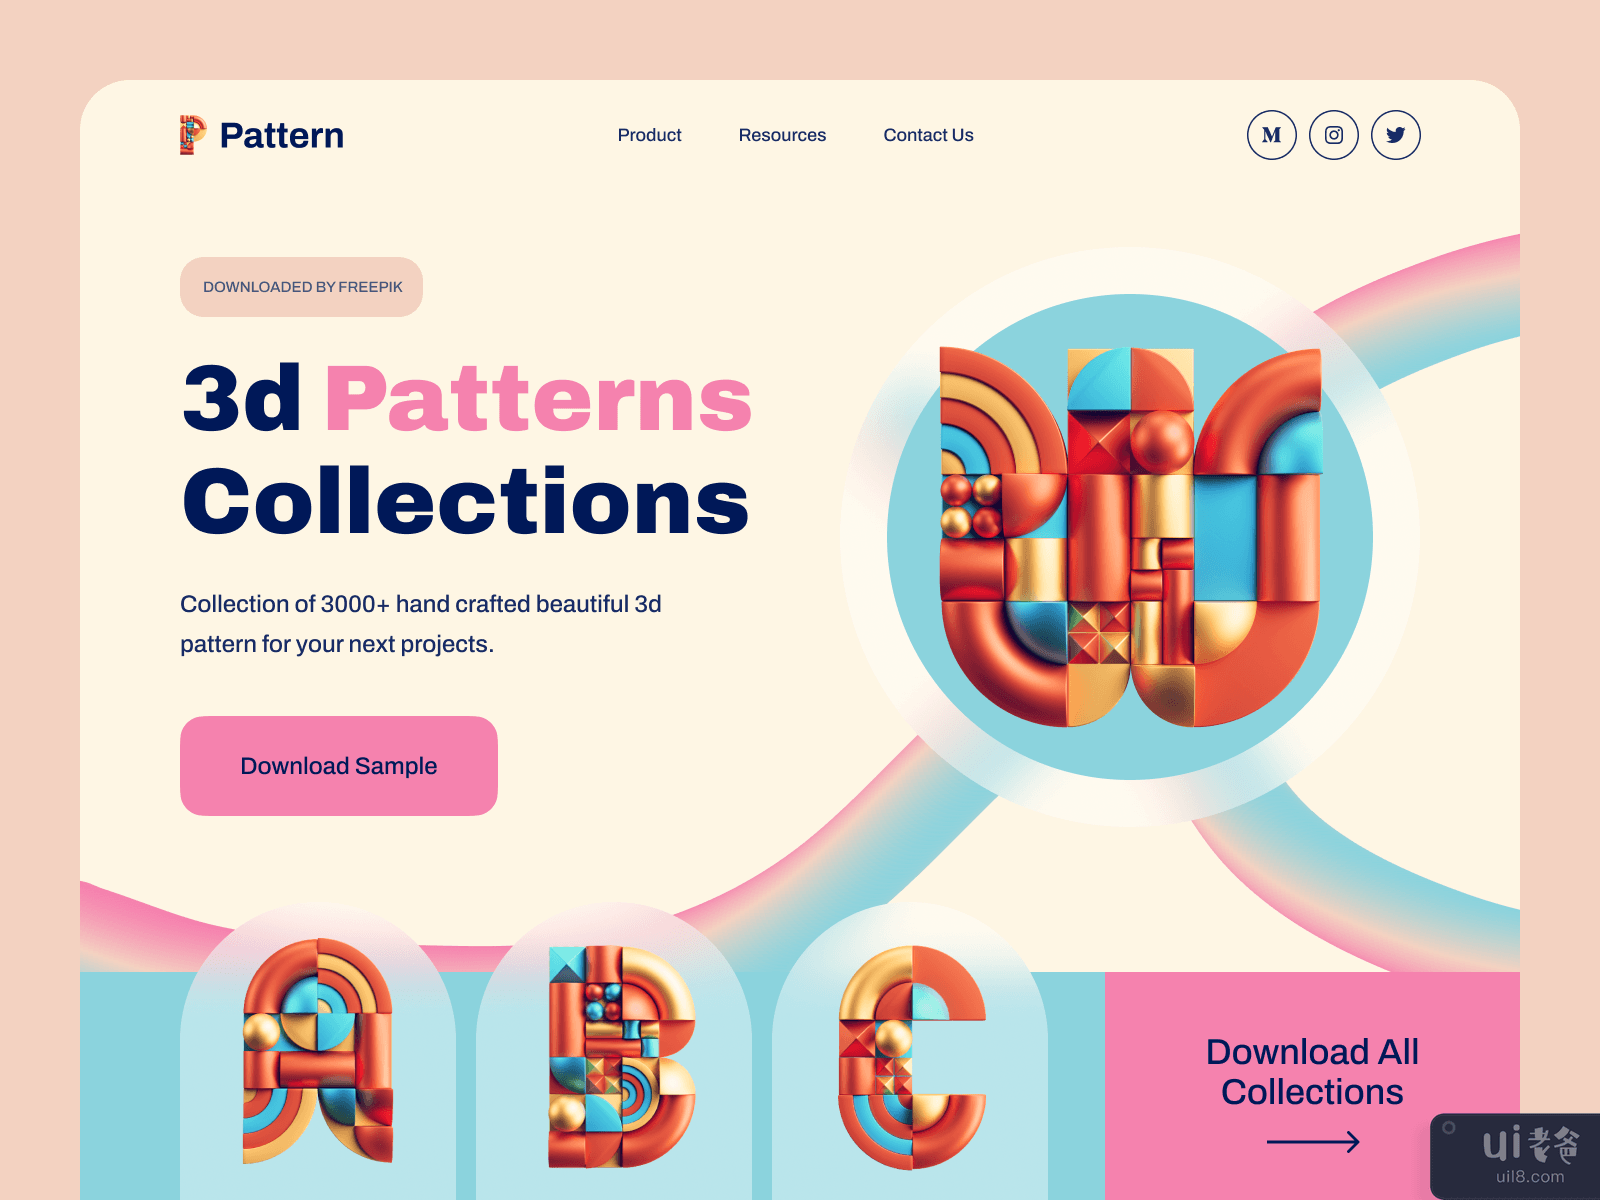 Pattern Library landing page